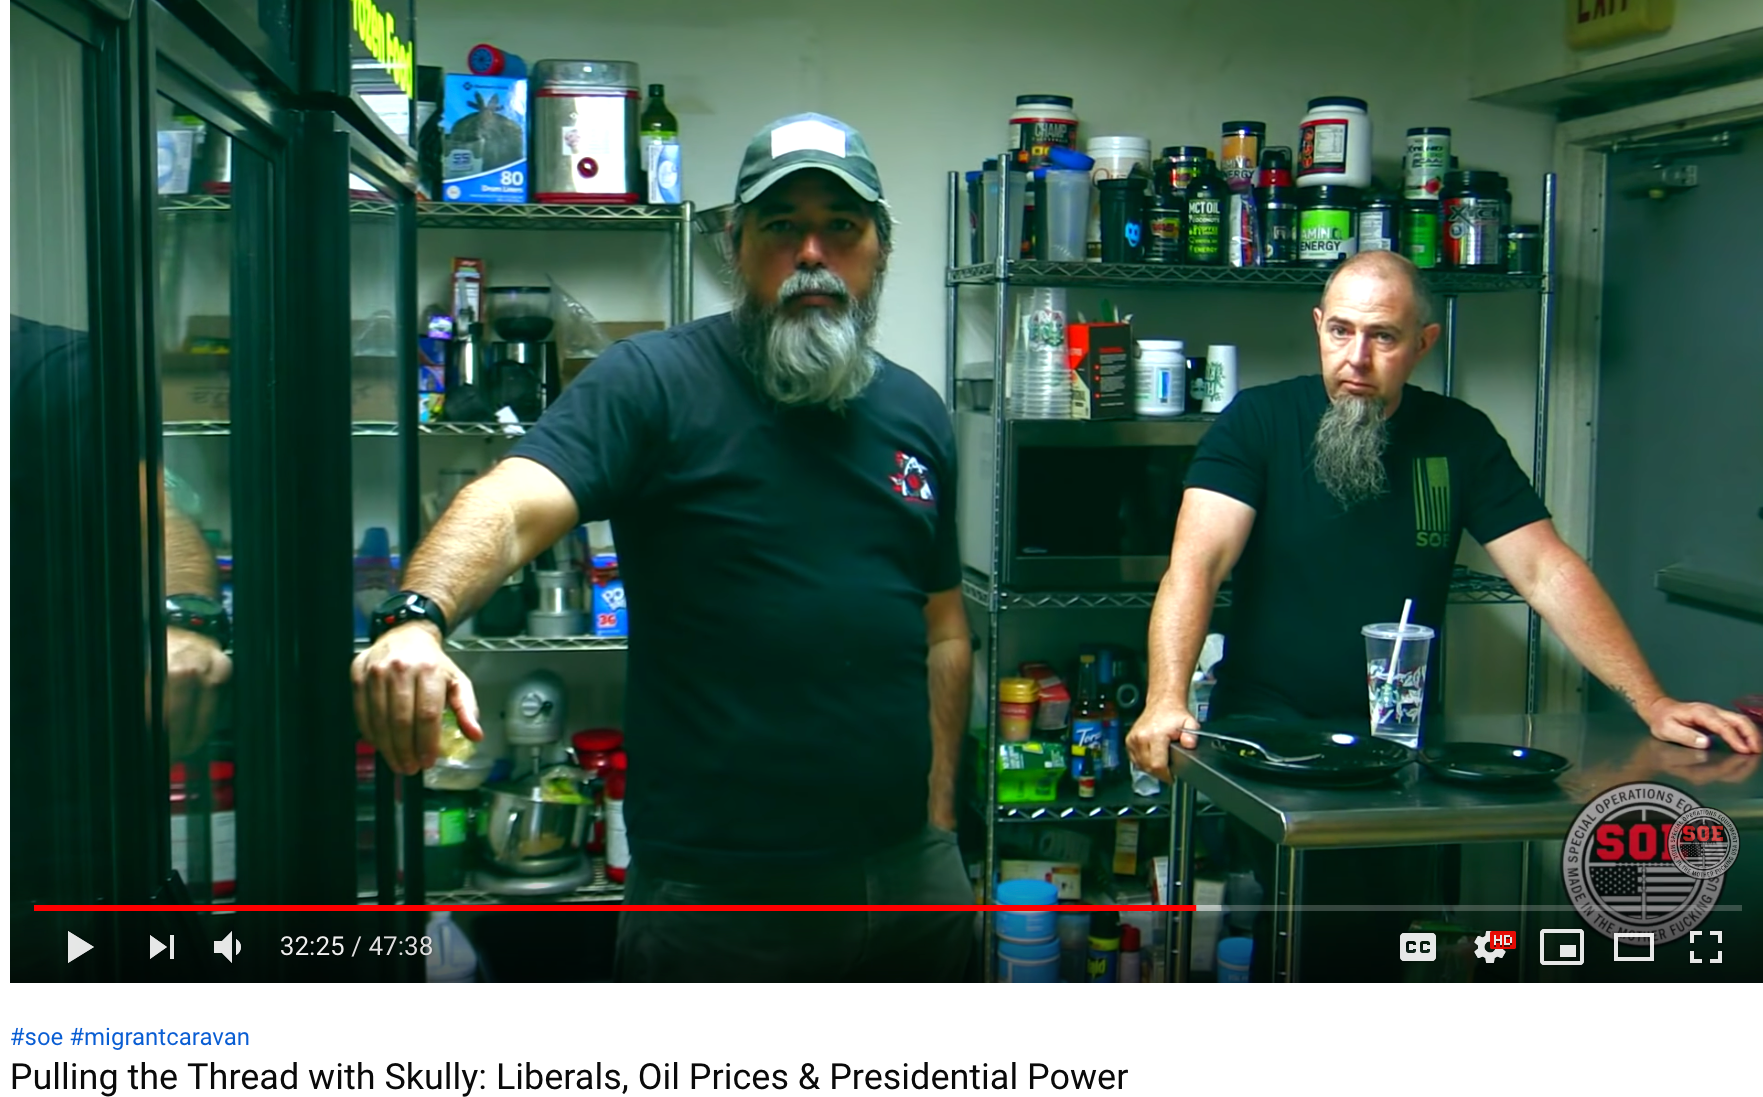 Pulling the Thread with Skully: Liberals, Oil Prices & Presidential Power